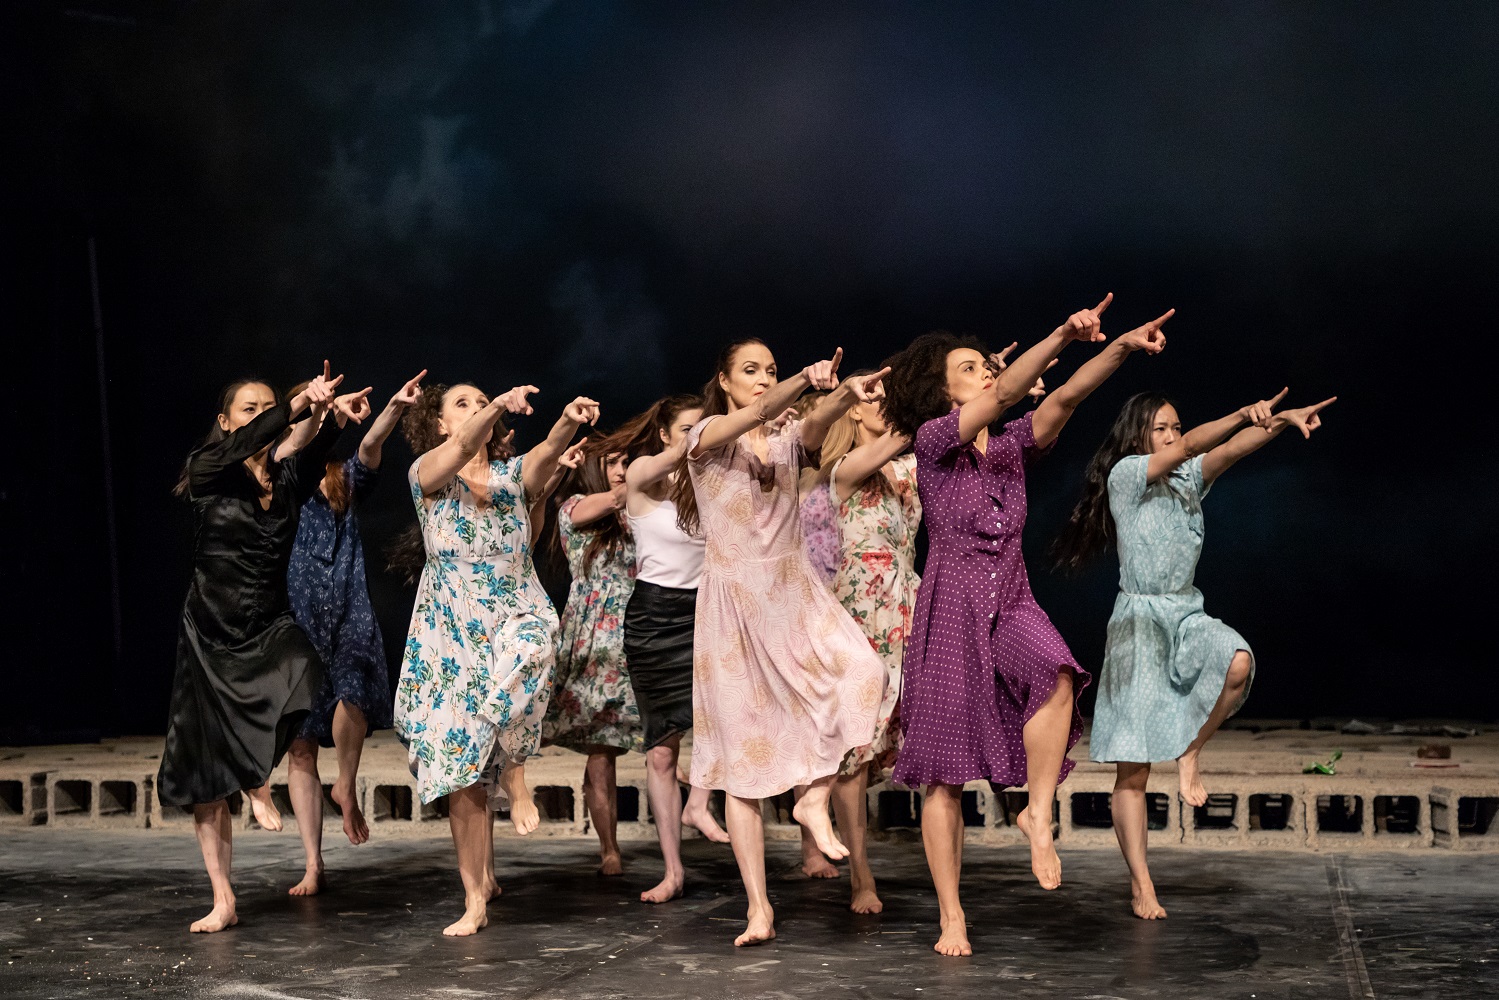 Ensemble in "Palermo Palermo" Choreography by Pina Bausch - Photo:©Oliver Look courtesy of The Music Center